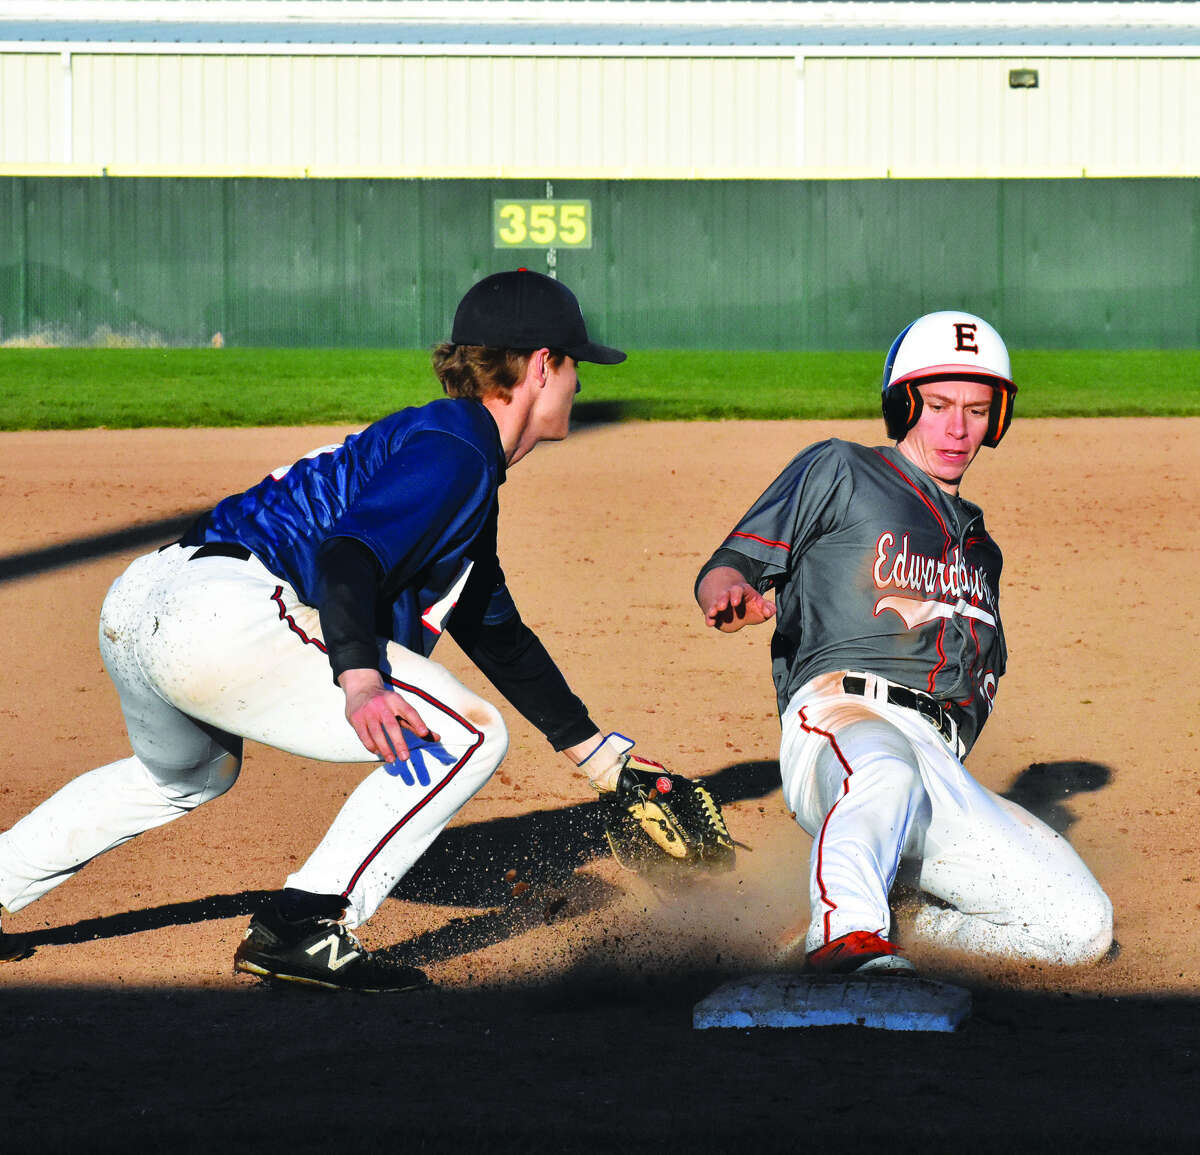 Edwardsville’s Aaron Young, right, slides safely into third base during the fifth inning against Parkway South.